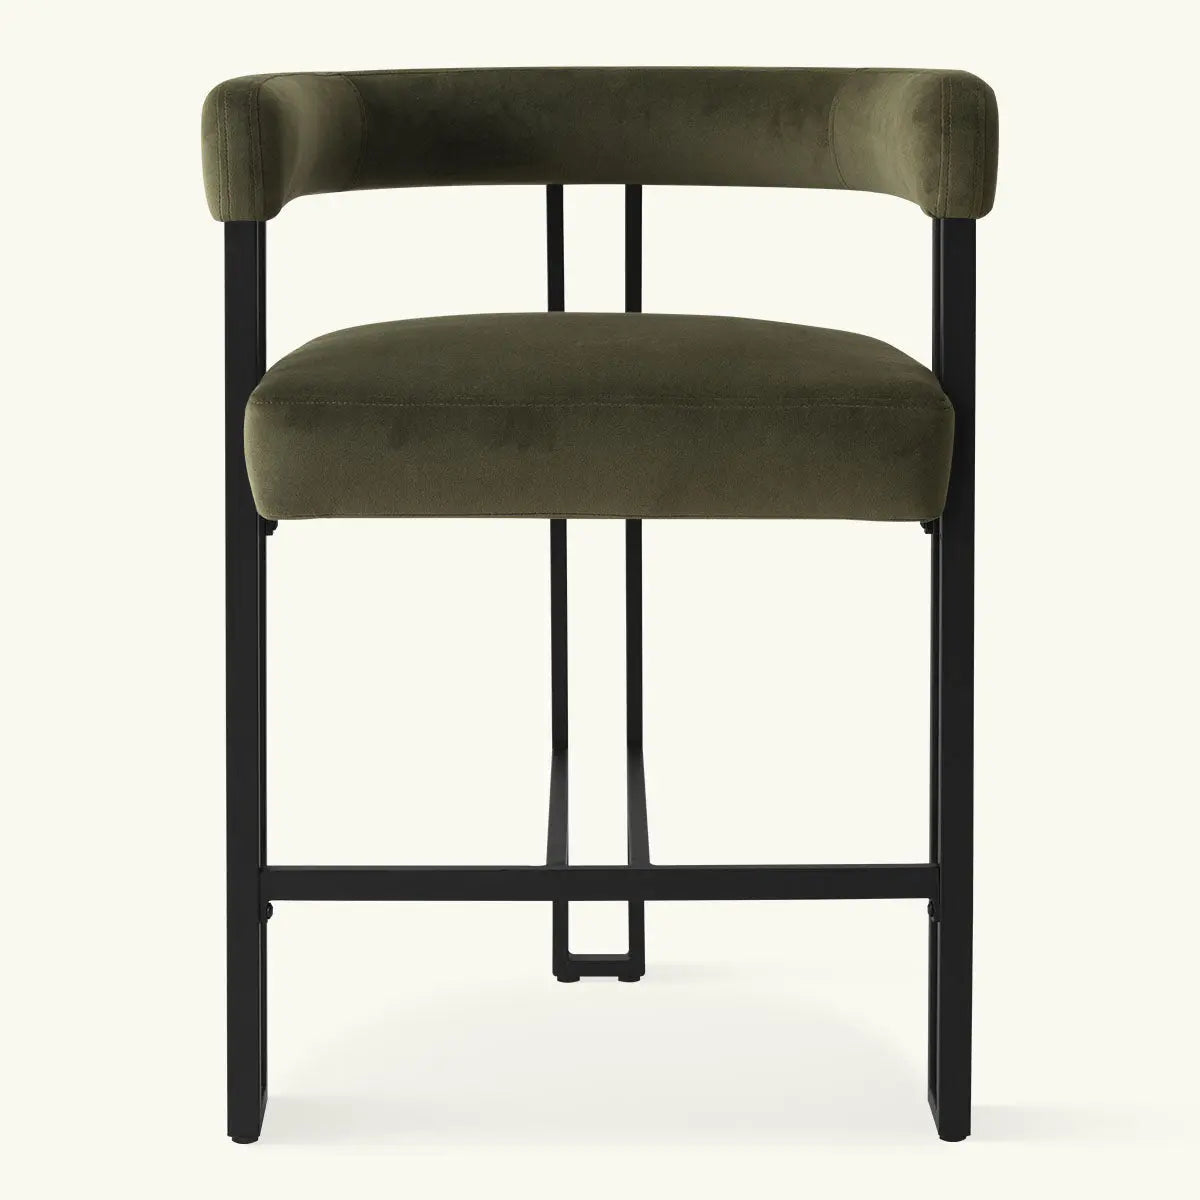 Mia Velvet-Upholstered, Armrest-Equipped Counter Stool - Stylish One-Piece Home Bar Seating Solution The Pop Maison